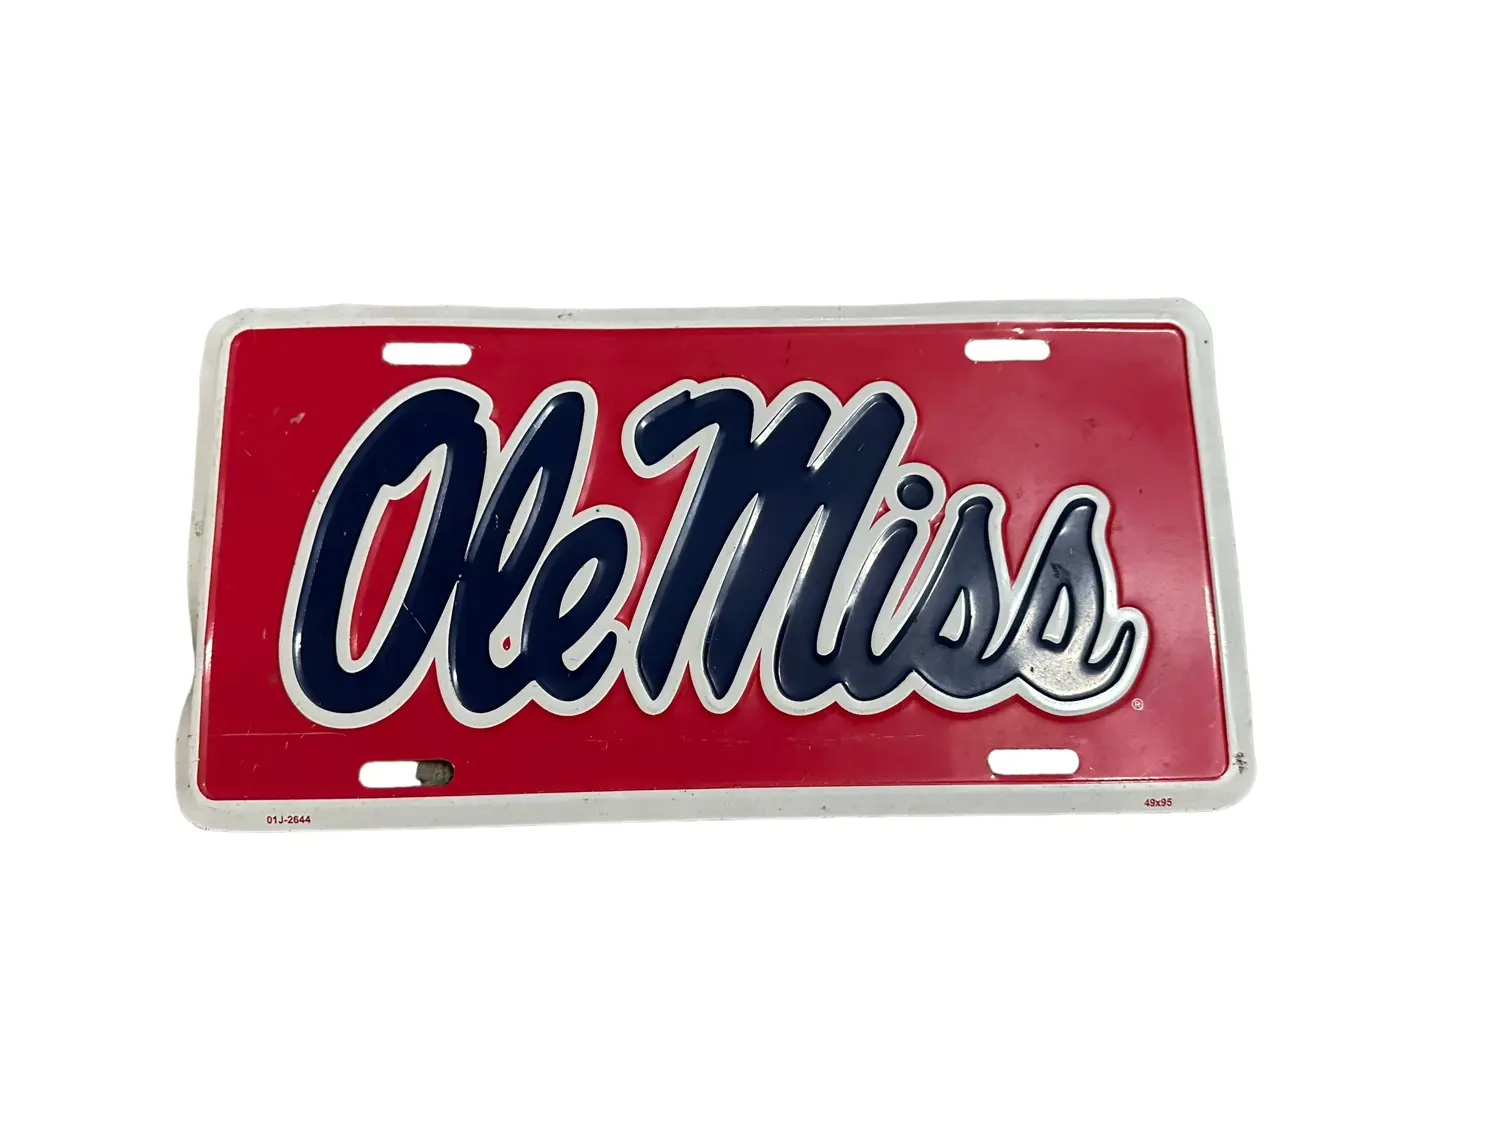 Ole miss license plate